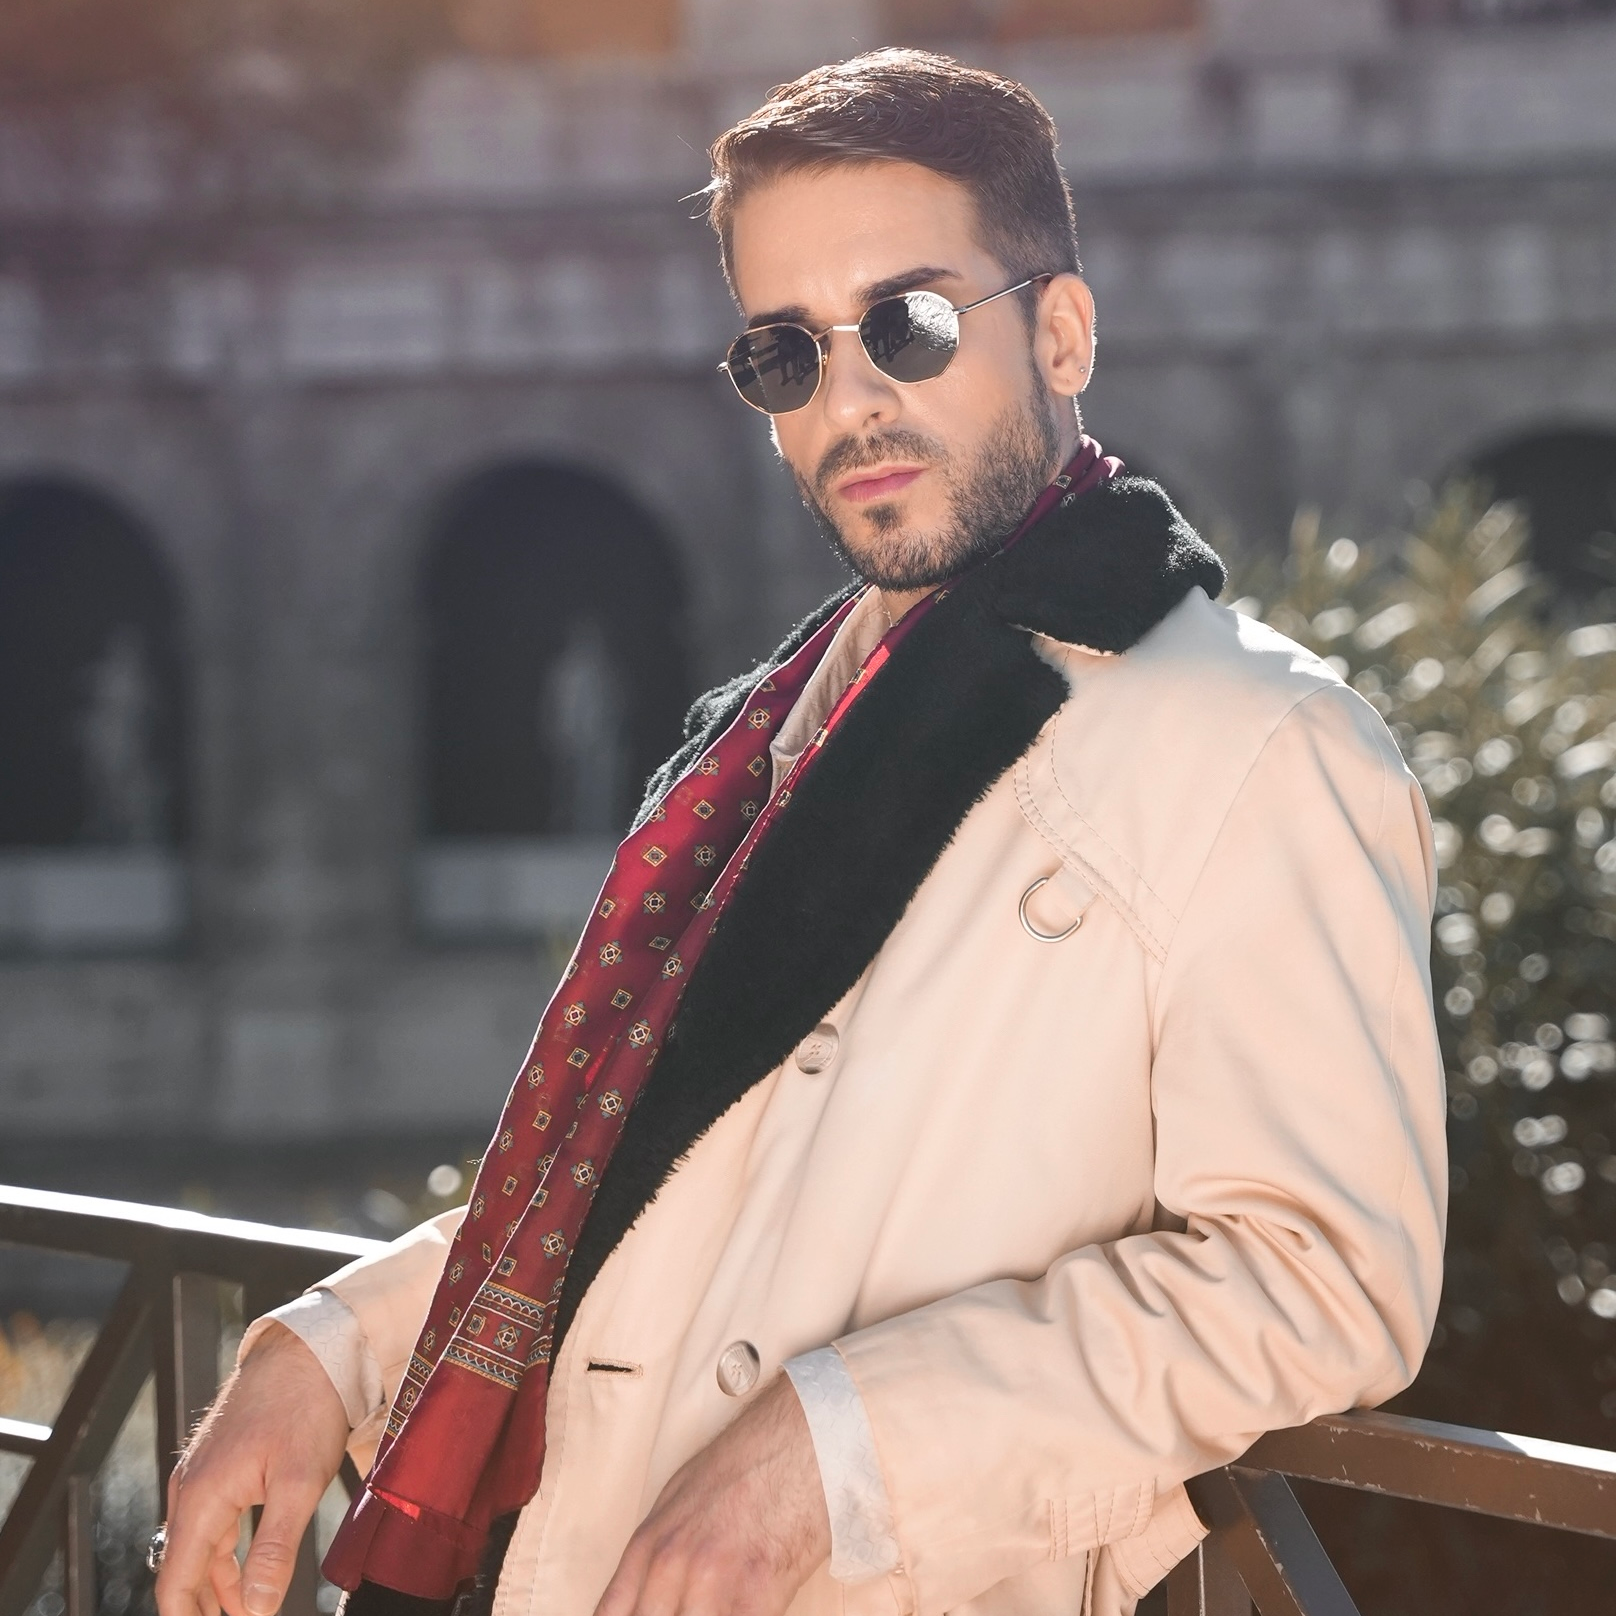 Memorí Men's sunglasses are the best men's sunglasses for small faces. Shown here in a hexagonal shape and modeled in front of the Colosseum in Rome by an Italian man with dark hair and a beard. 